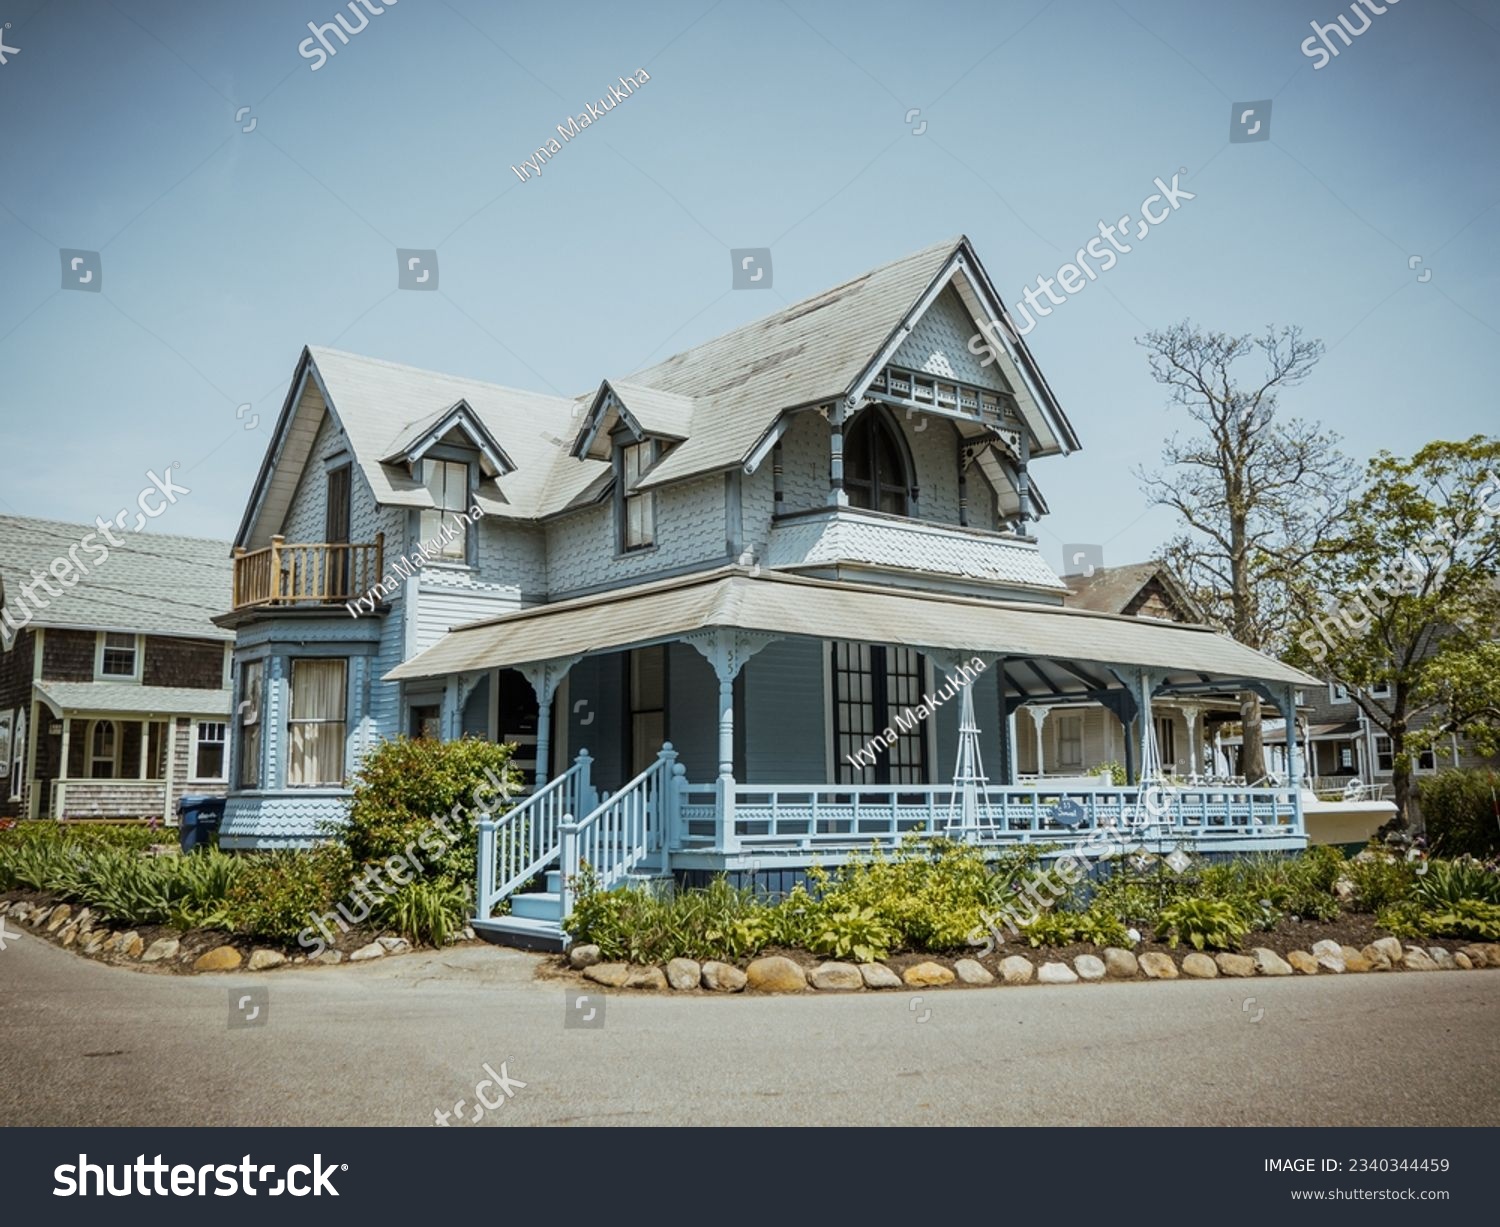 Beautiful colourful gingerbread houses, cottages in Oak Bluffs center, Martha's Vineyard island in Massachusetts USA on a sunny summer day #2340344459